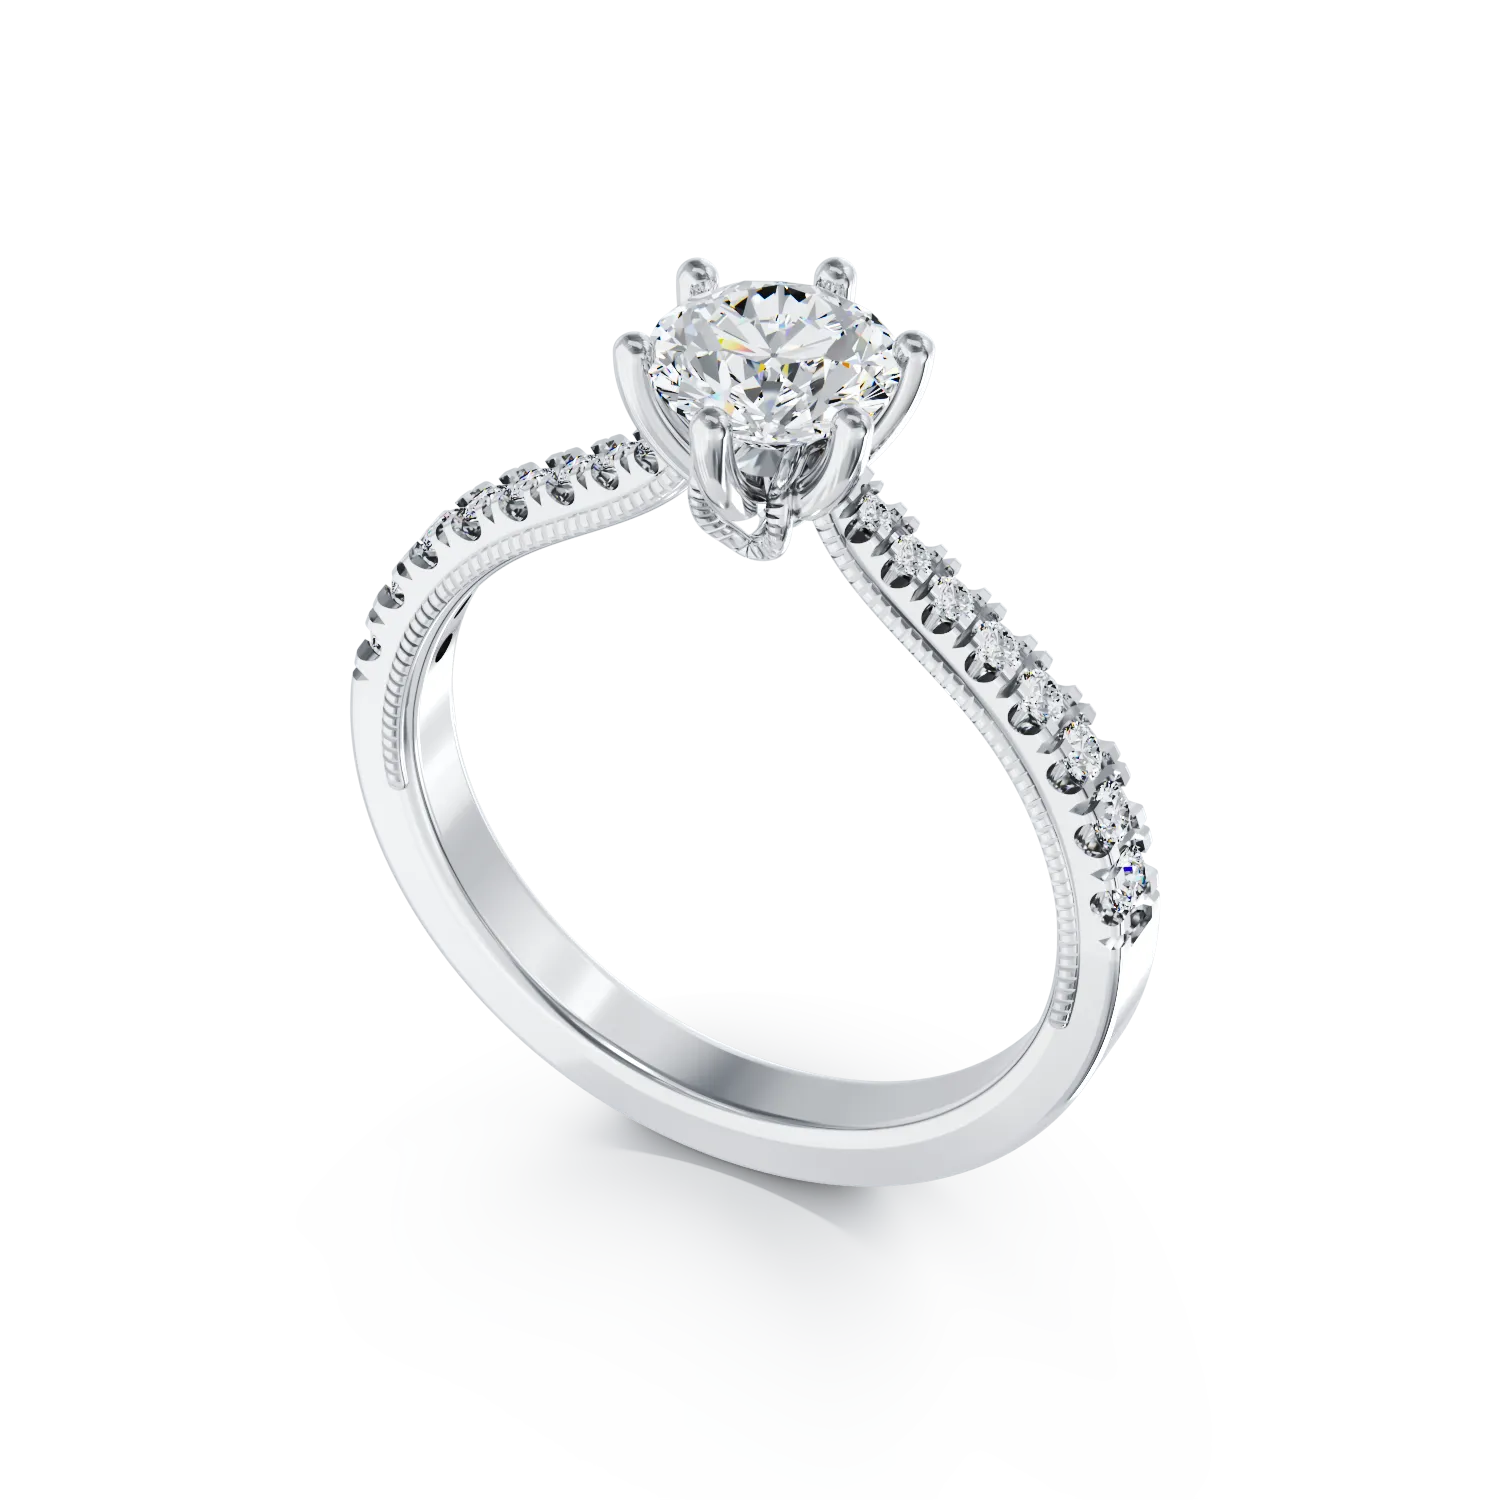 18K white gold engagement ring with 0.4ct diamond and 0.23ct diamonds